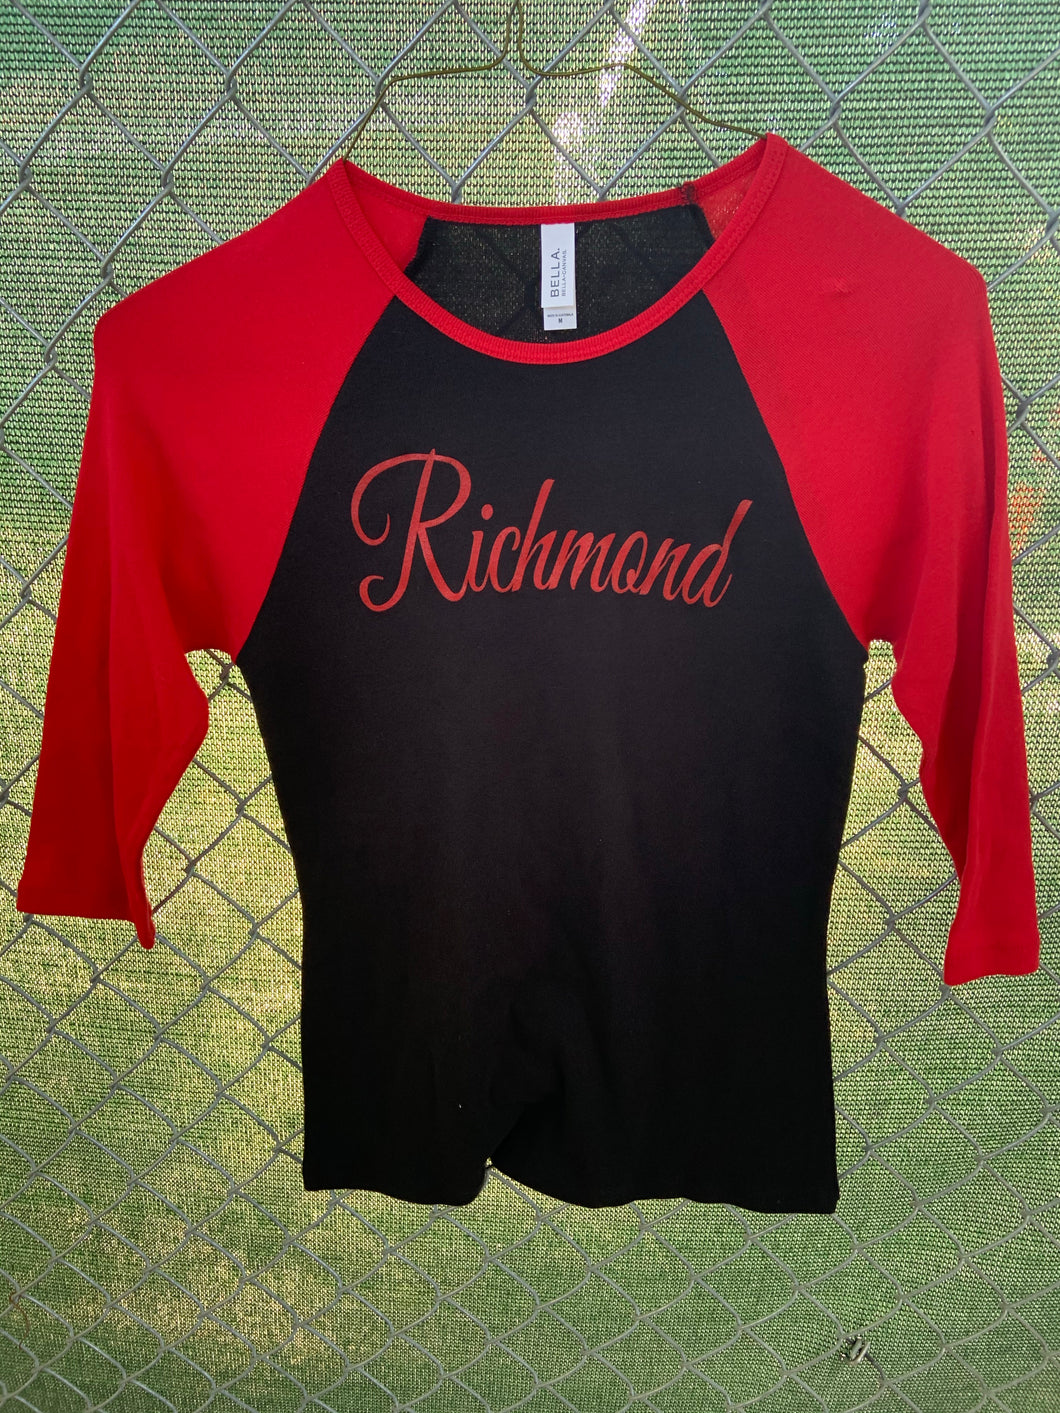 Black and red baseball t